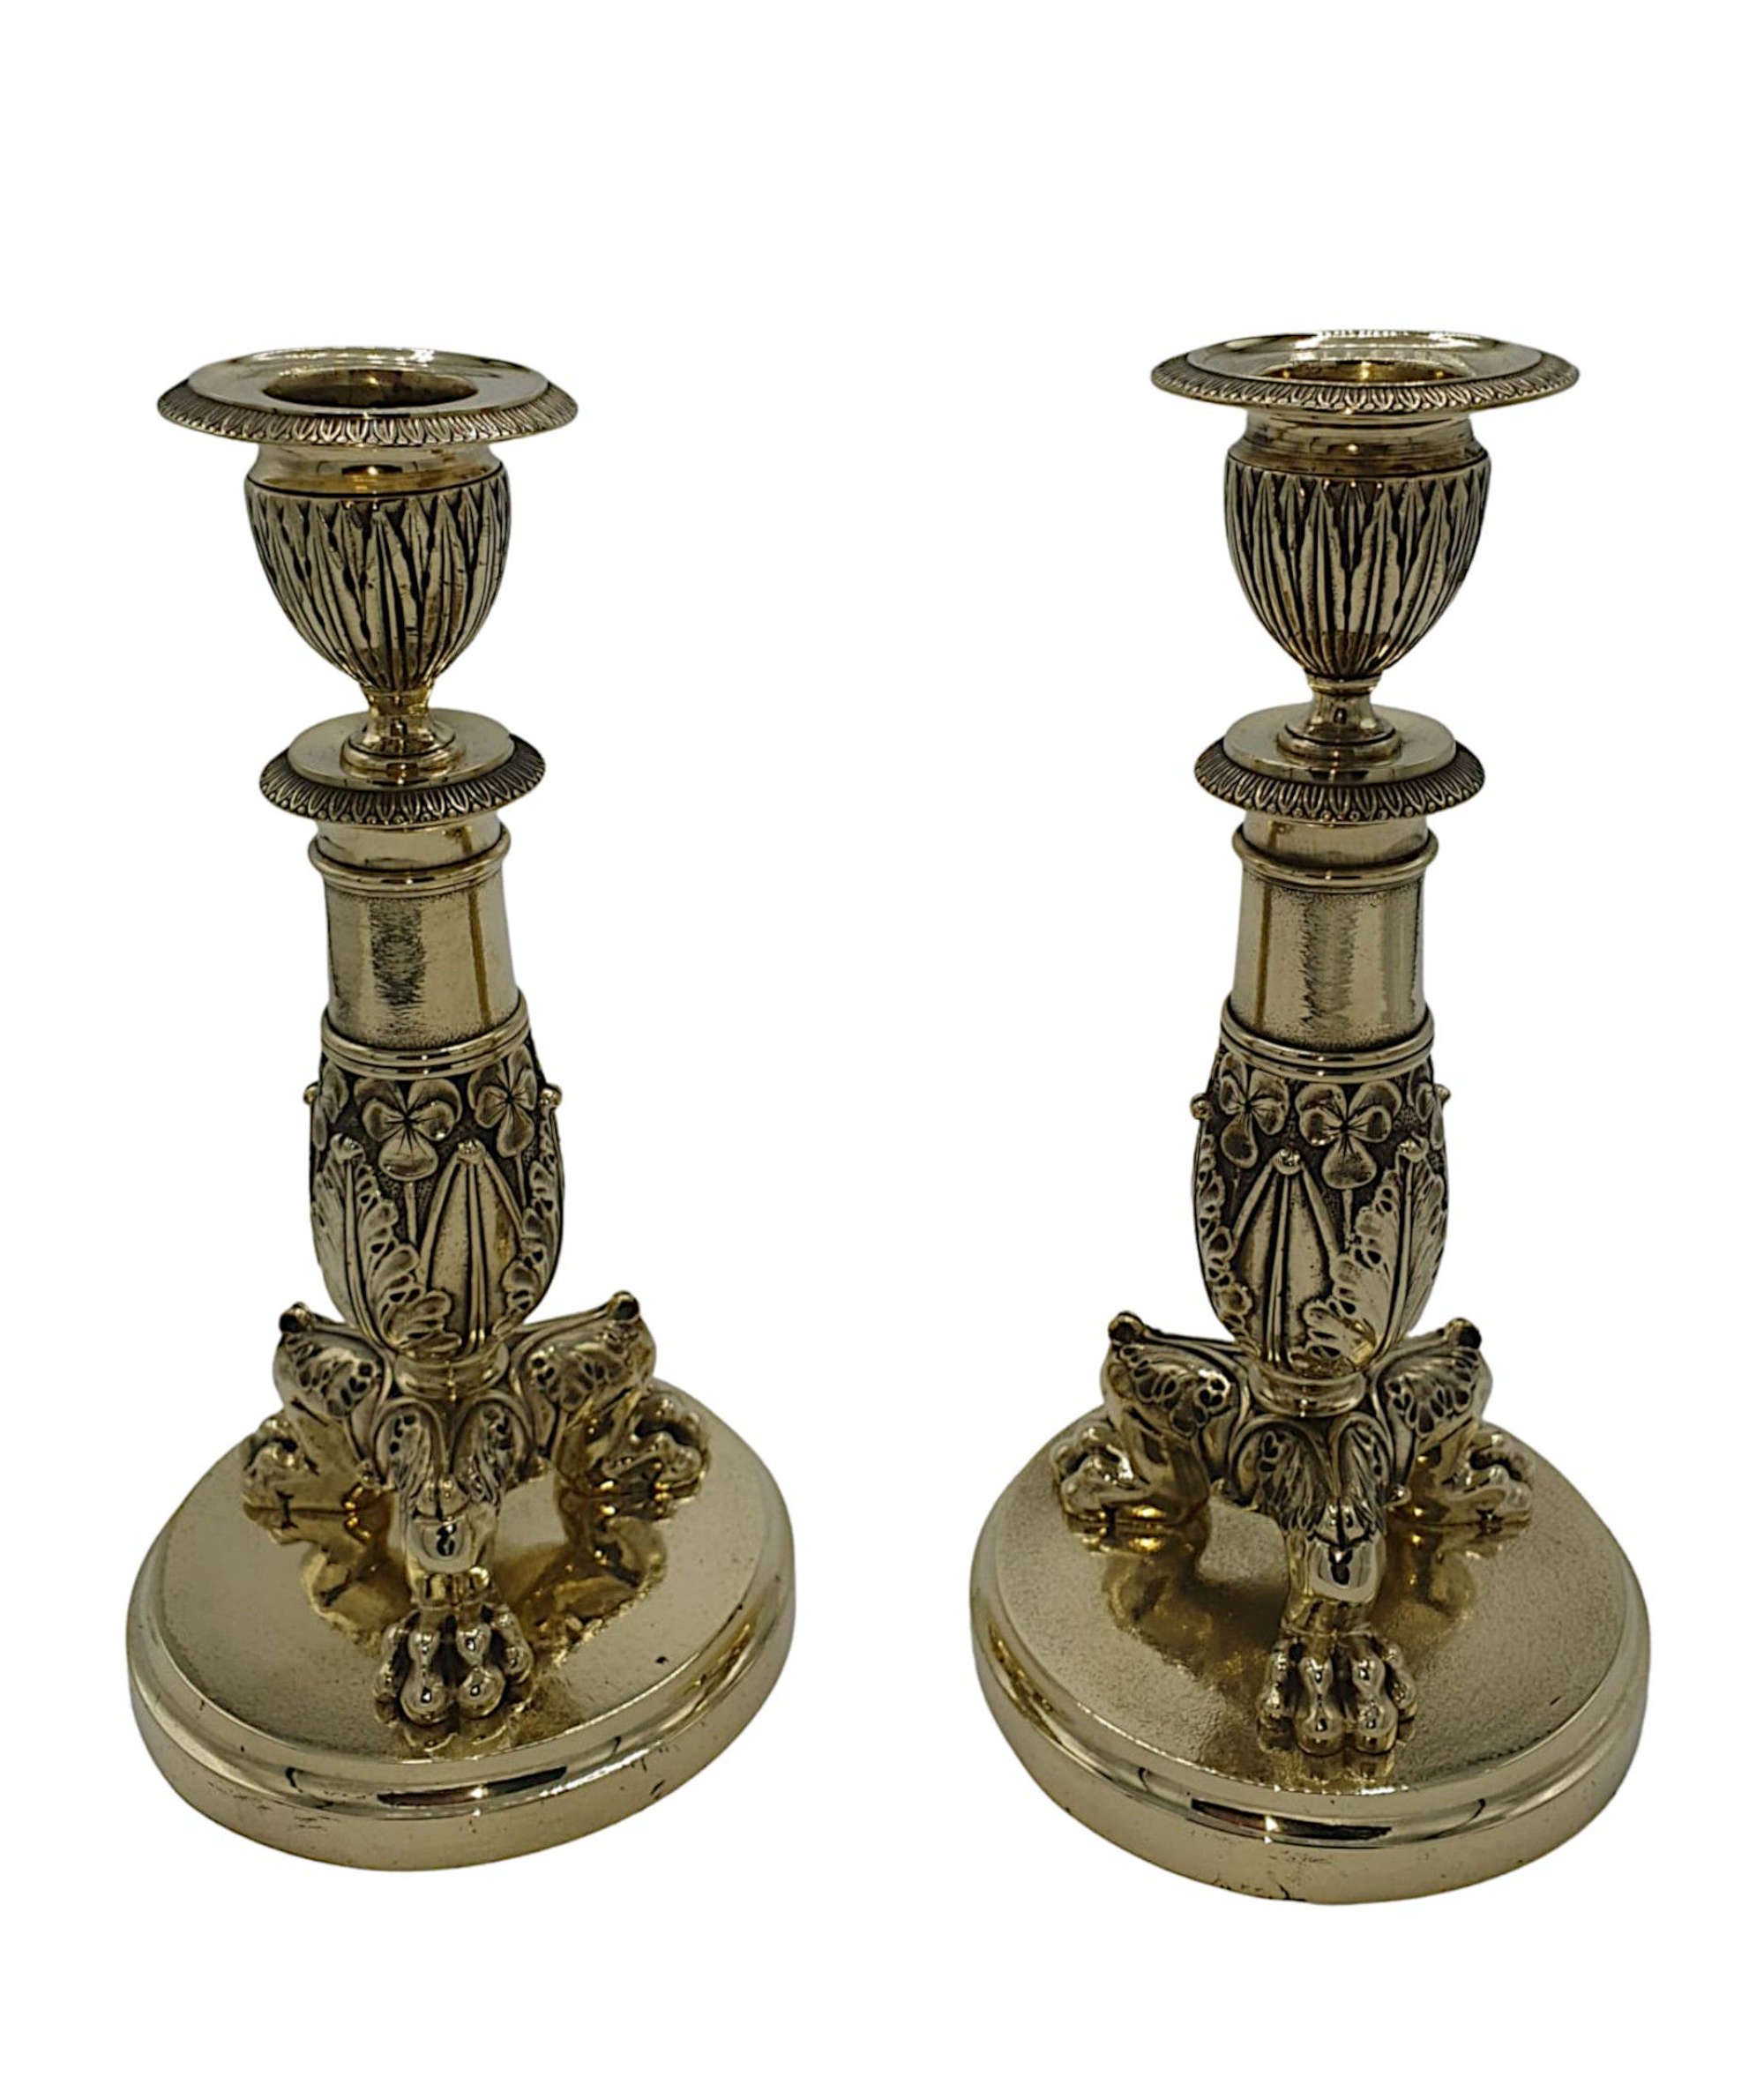 A Beautiful Pair Of 19th Century Polished Brass Antique Candlesticks